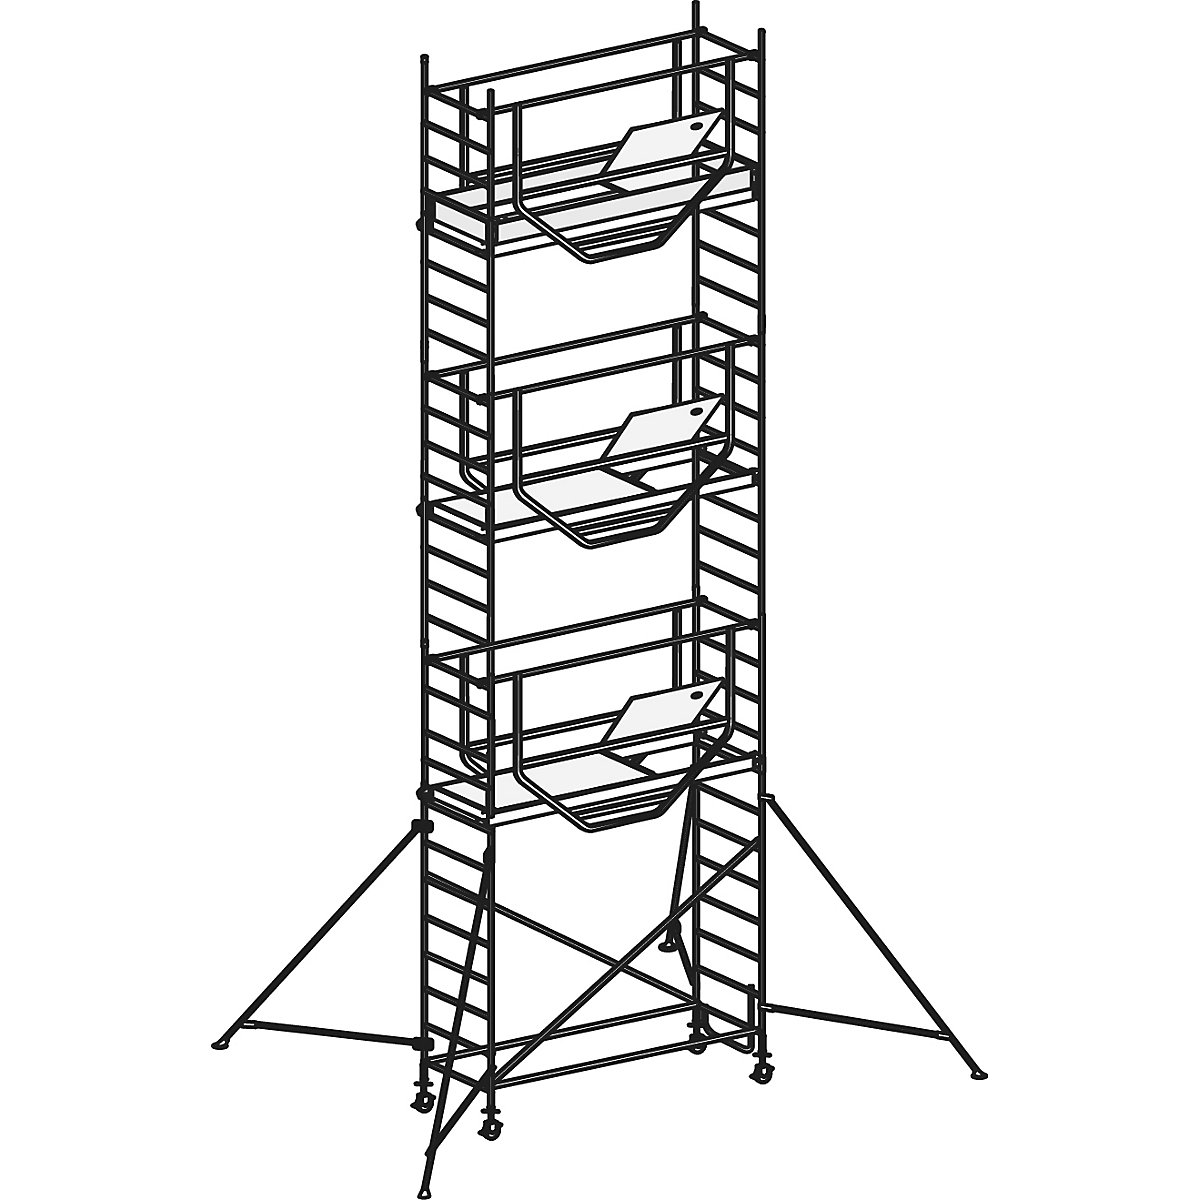 ADVANCED SAFE-T 7070 mobile access tower – HYMER, welded, platform 1.58 x 0.61 m, module 1+2+3+kit-5